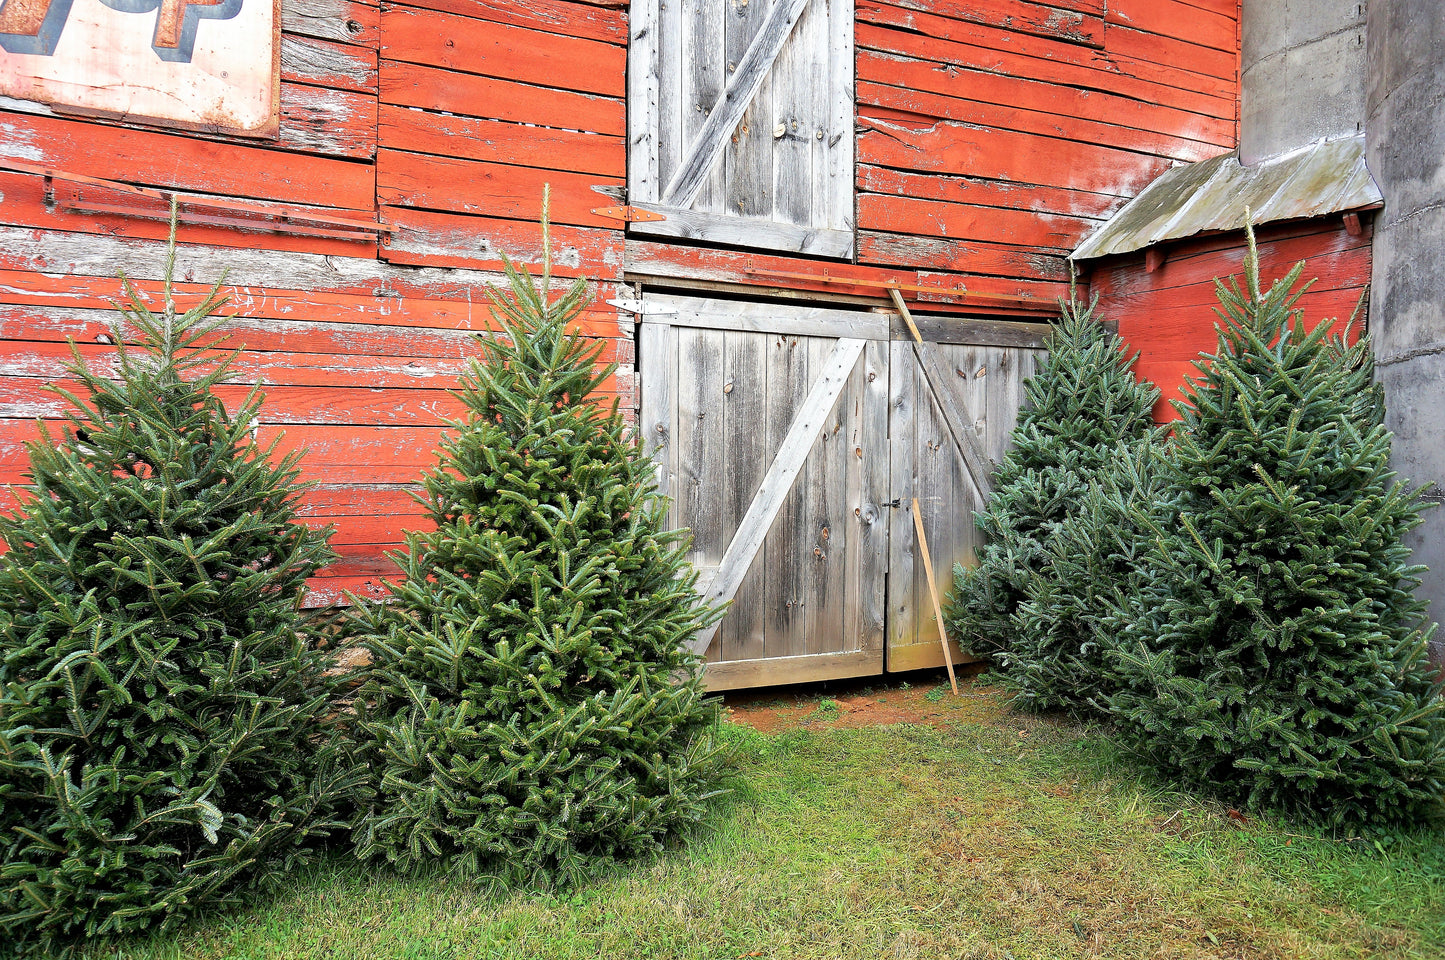 Grow Your Own CHRISTMAS TREE - Fraser Fir ( Abies Fraseri ) Gift Packet of Tree Seeds